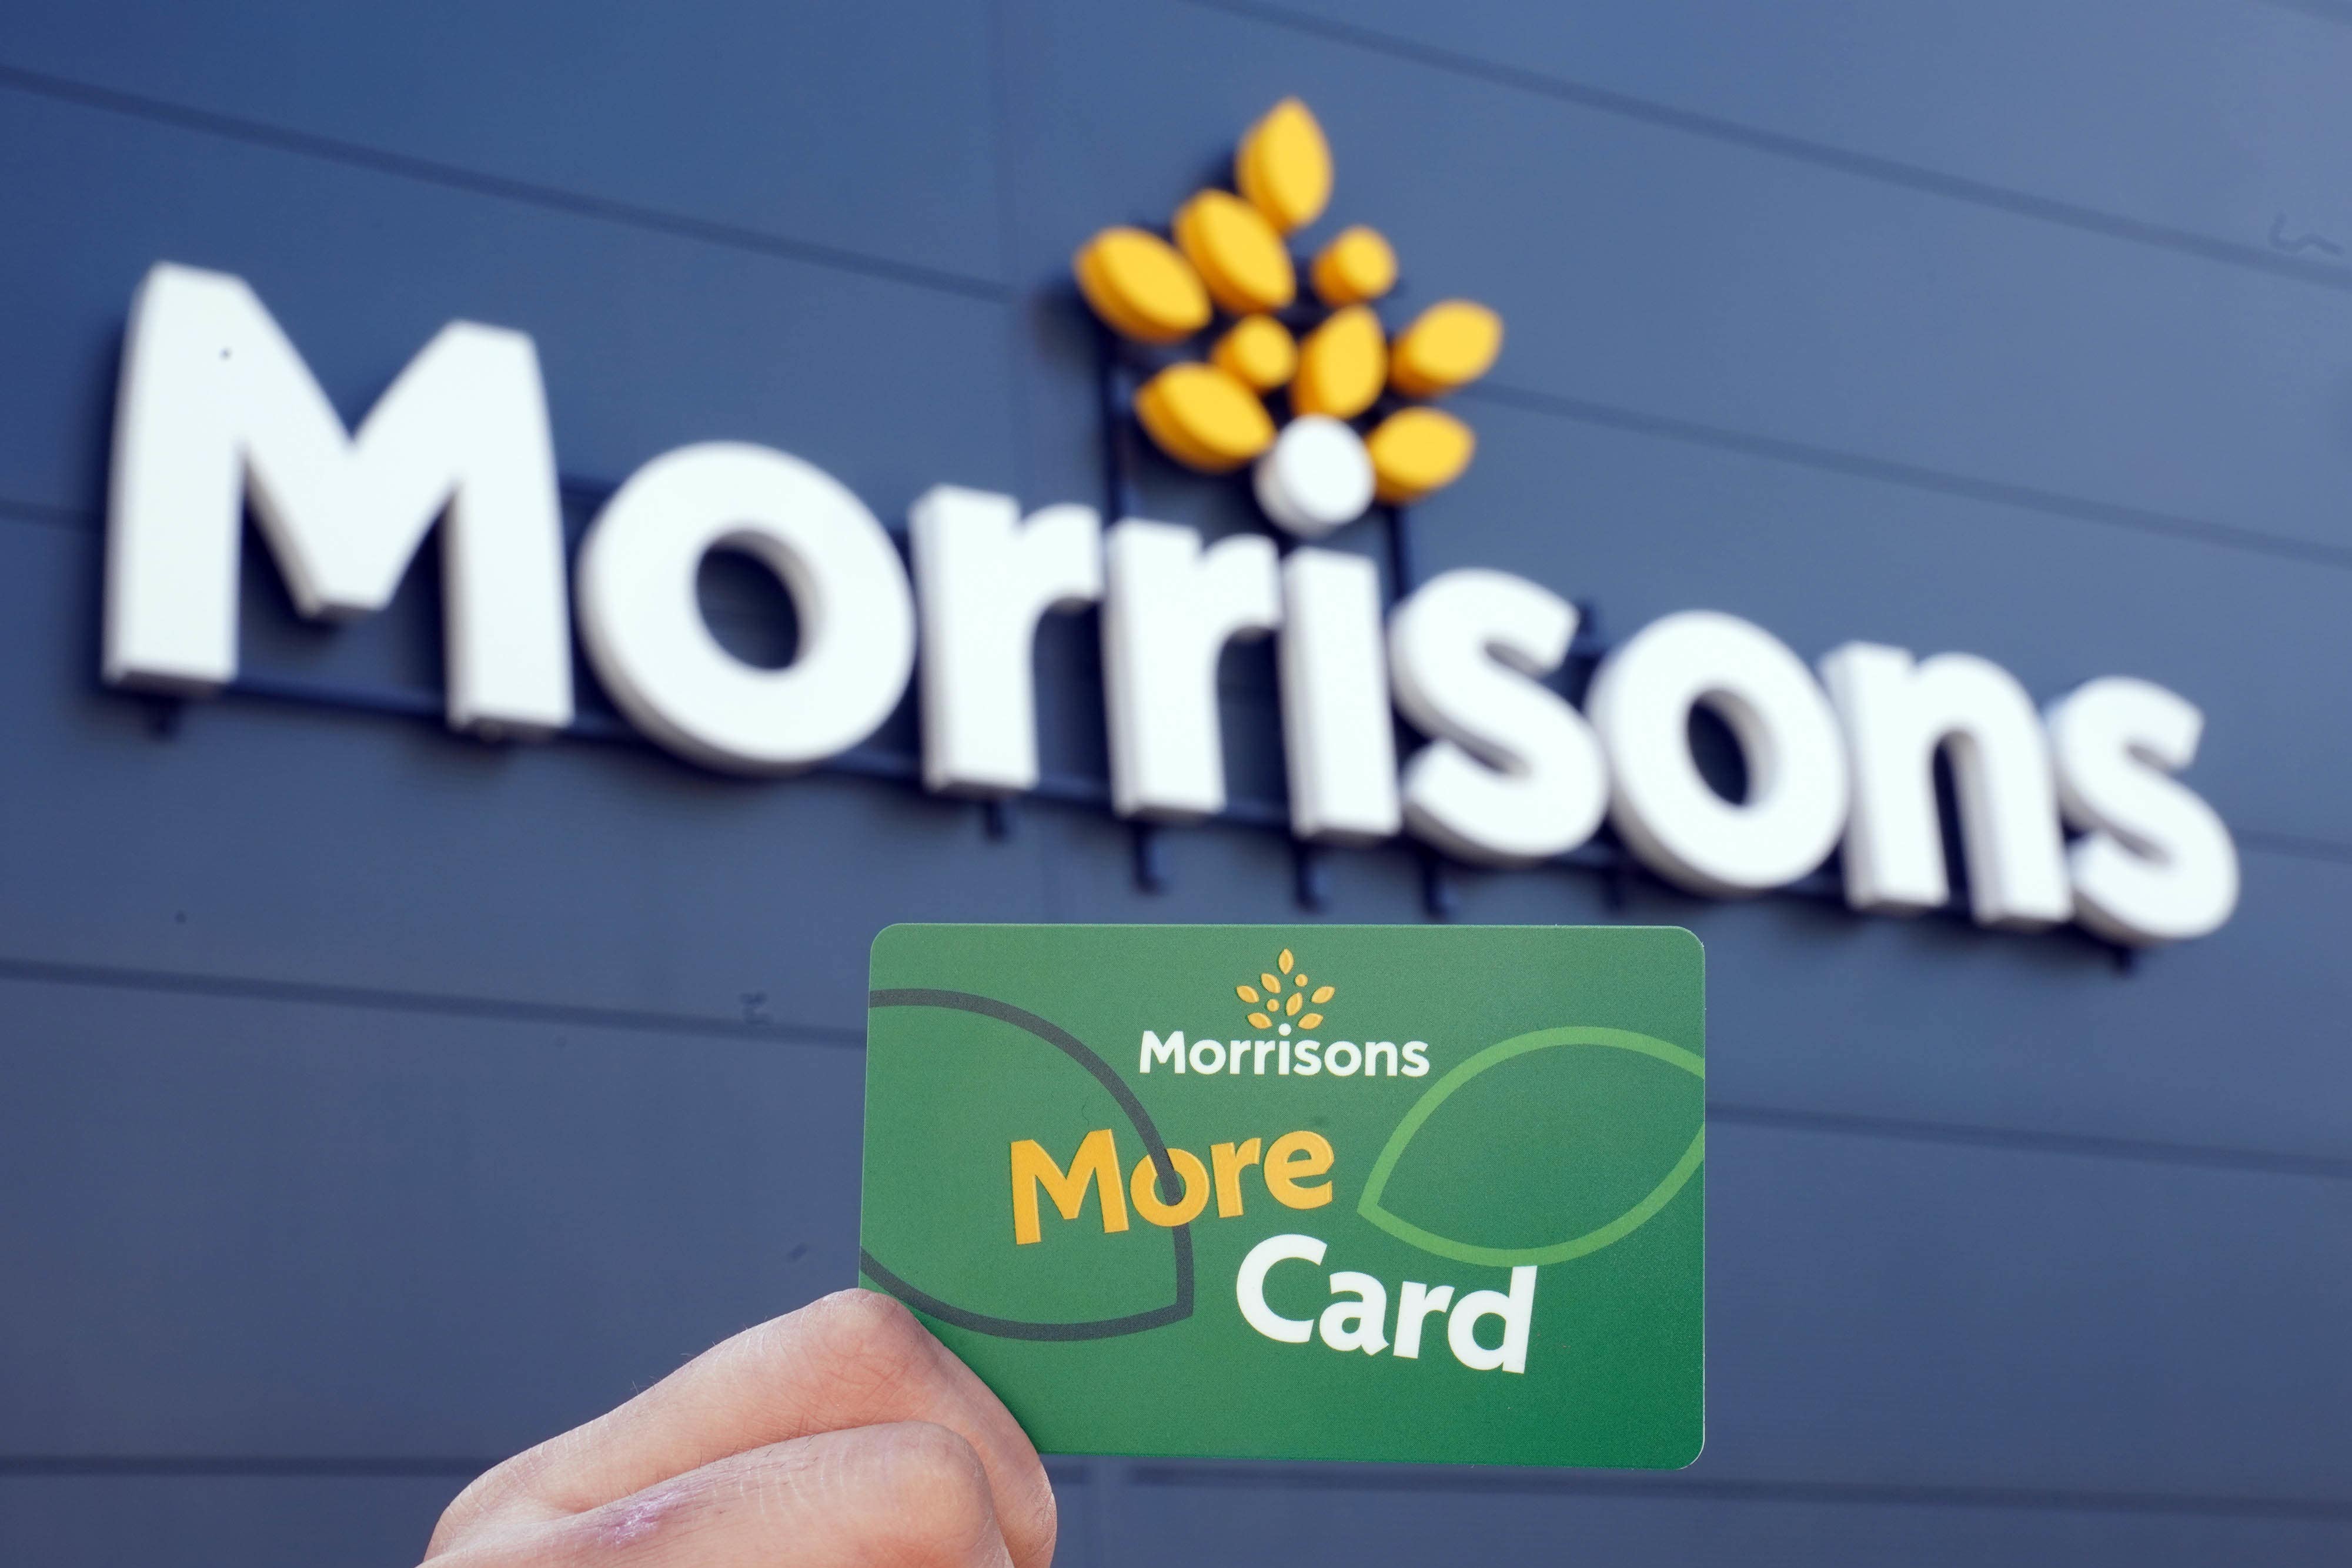 The new Morrisons More Card loyalty programme is being rolled out nationwide (Owen Humphreys/PA)